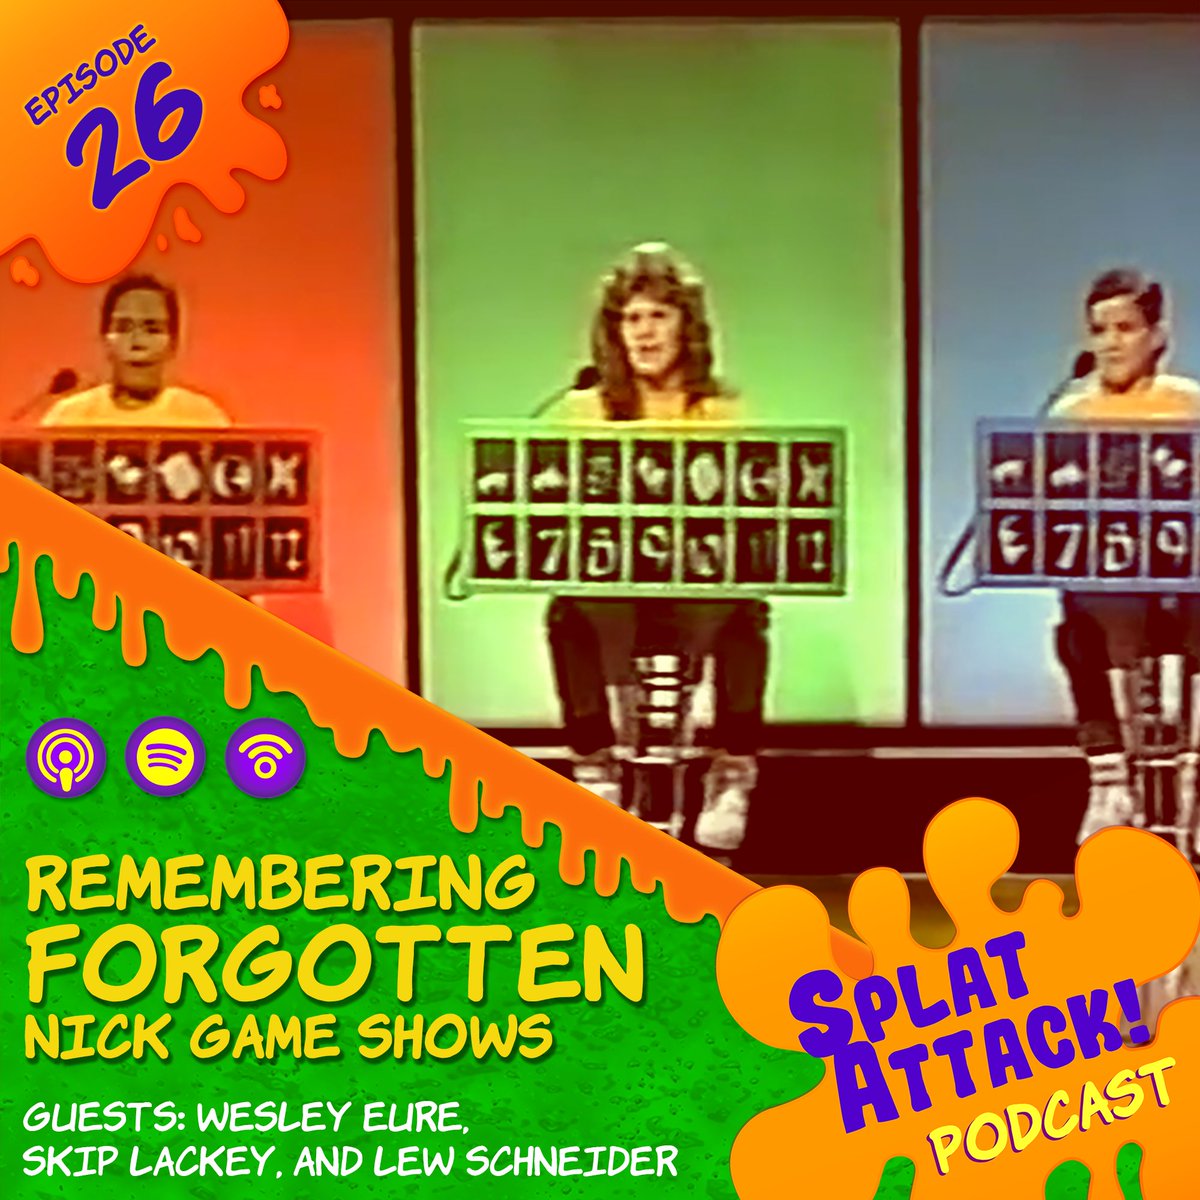 We sat down with @wesleyeure host of Finders Keepers, @notthatLew host of Make the Grade, and @followSkip host of Think Fast to ask them about their experience with each respective show.
youtu.be/cd375KD5Luk
#nickelodeon #splatattack #finderskeepers #makethegrade #thinkfast